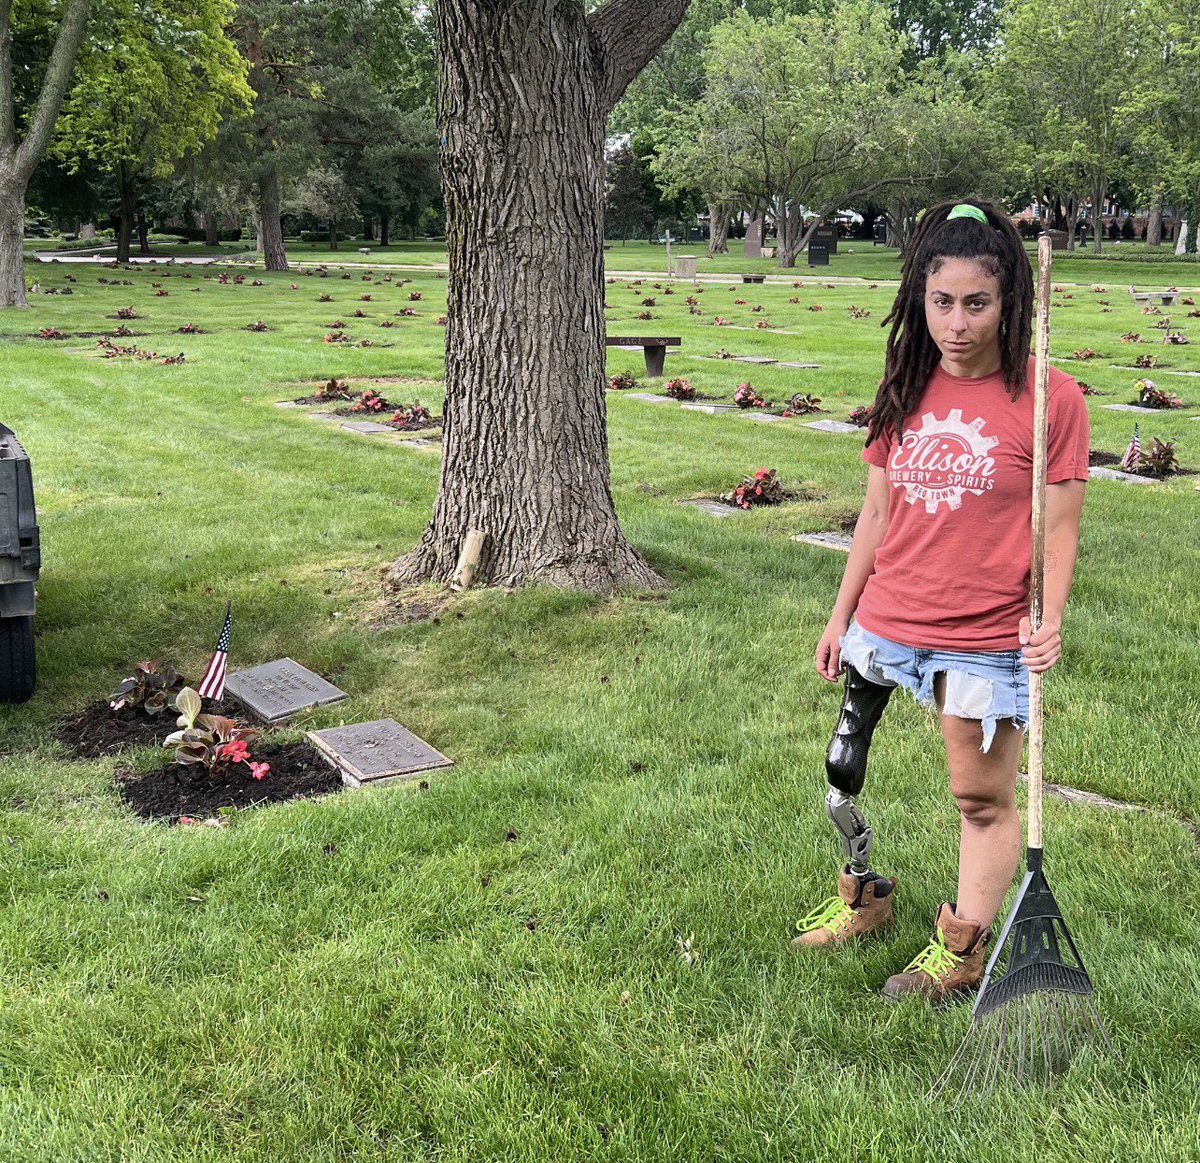 At the cemetery this morning I met this young woman placing the remaining flags on the graves of our veterans.